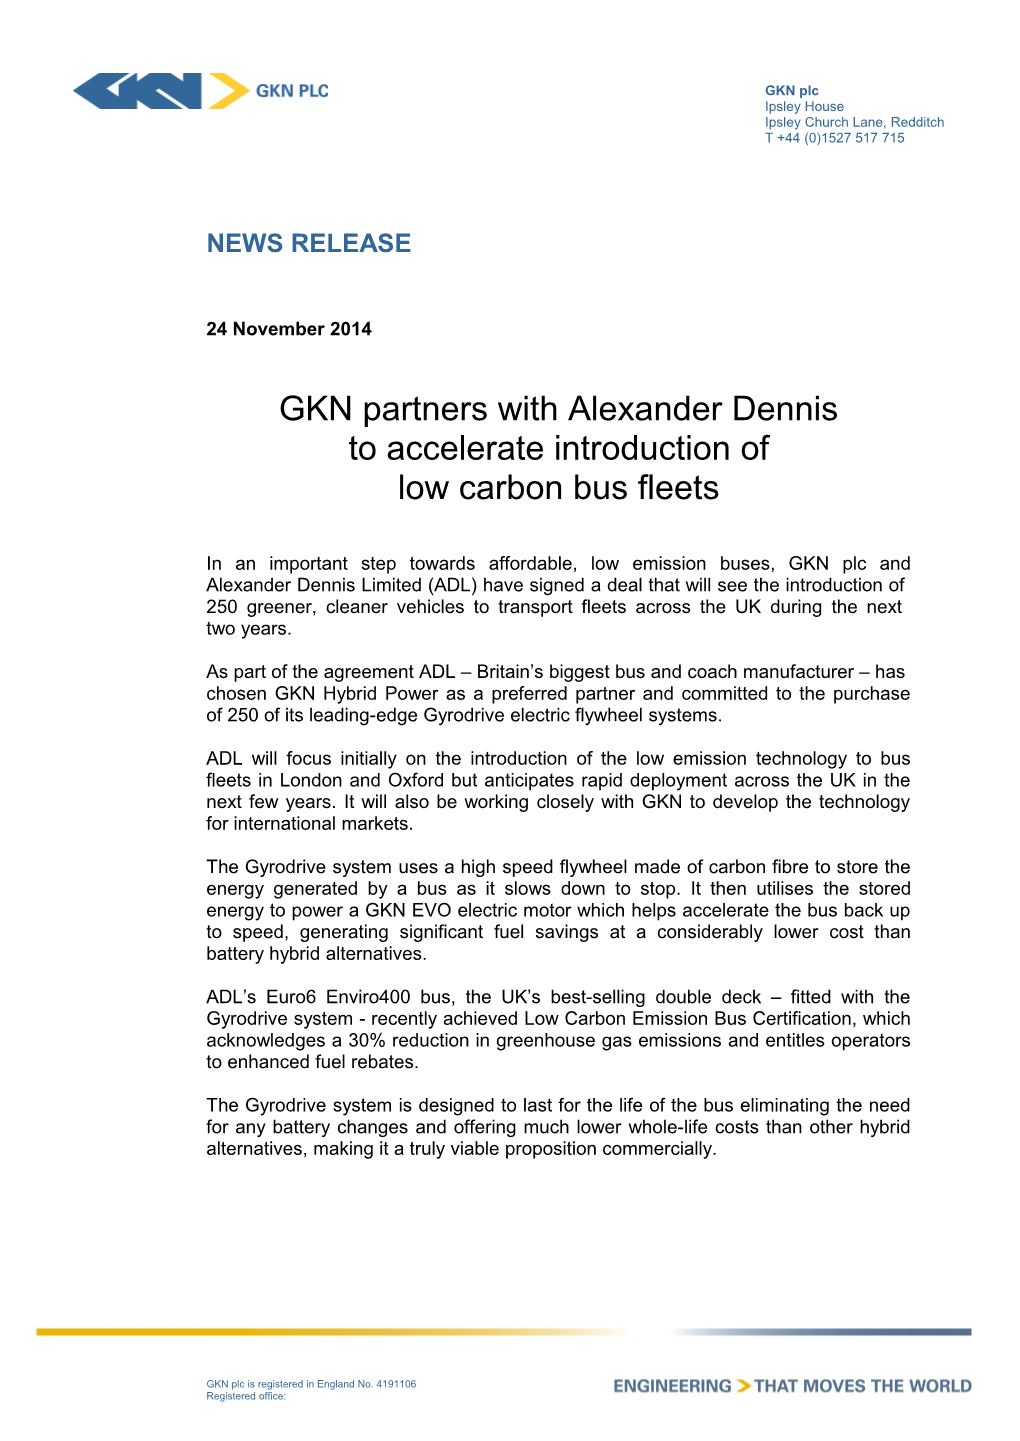 GKN Partners with Alexander Dennis to Accelerate Introduction of Low Carbon Bus Fleets